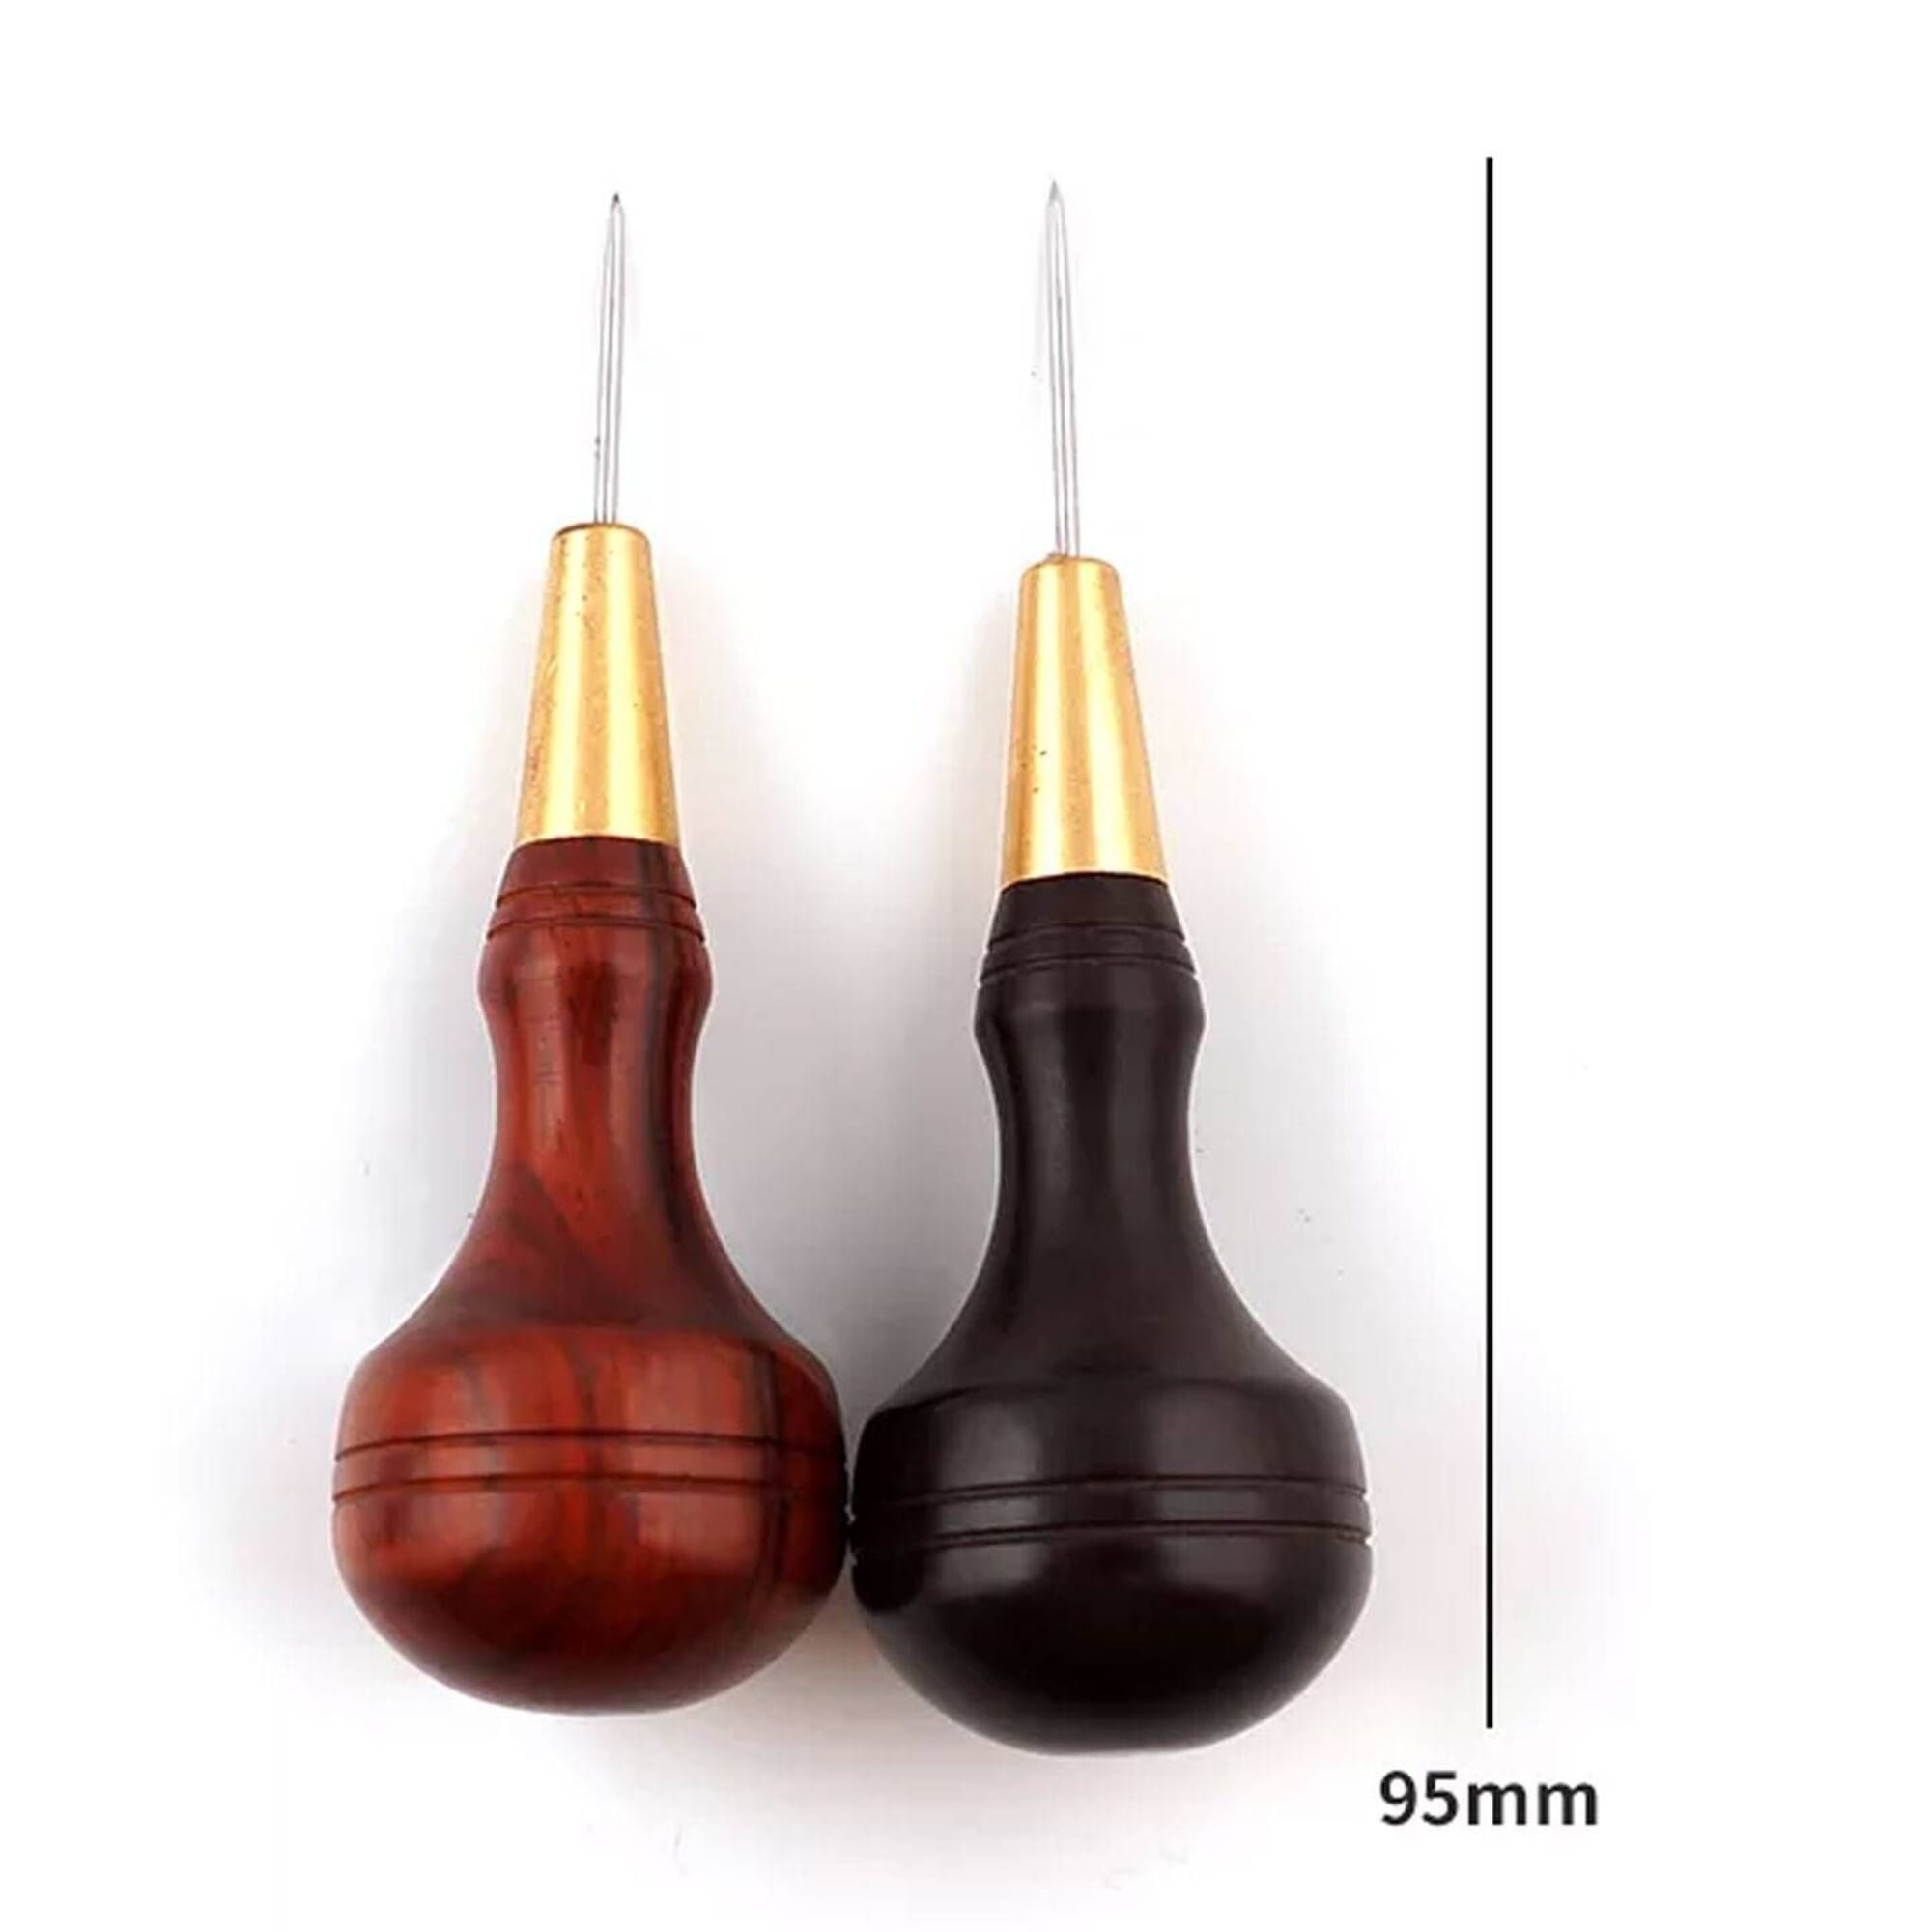 Speedy Drilling Wooden Craft Scratching Awl Thread - Pack of 3 - Heavy Duty  Pattern Leather Hole Small Bookbinding Wood Awl